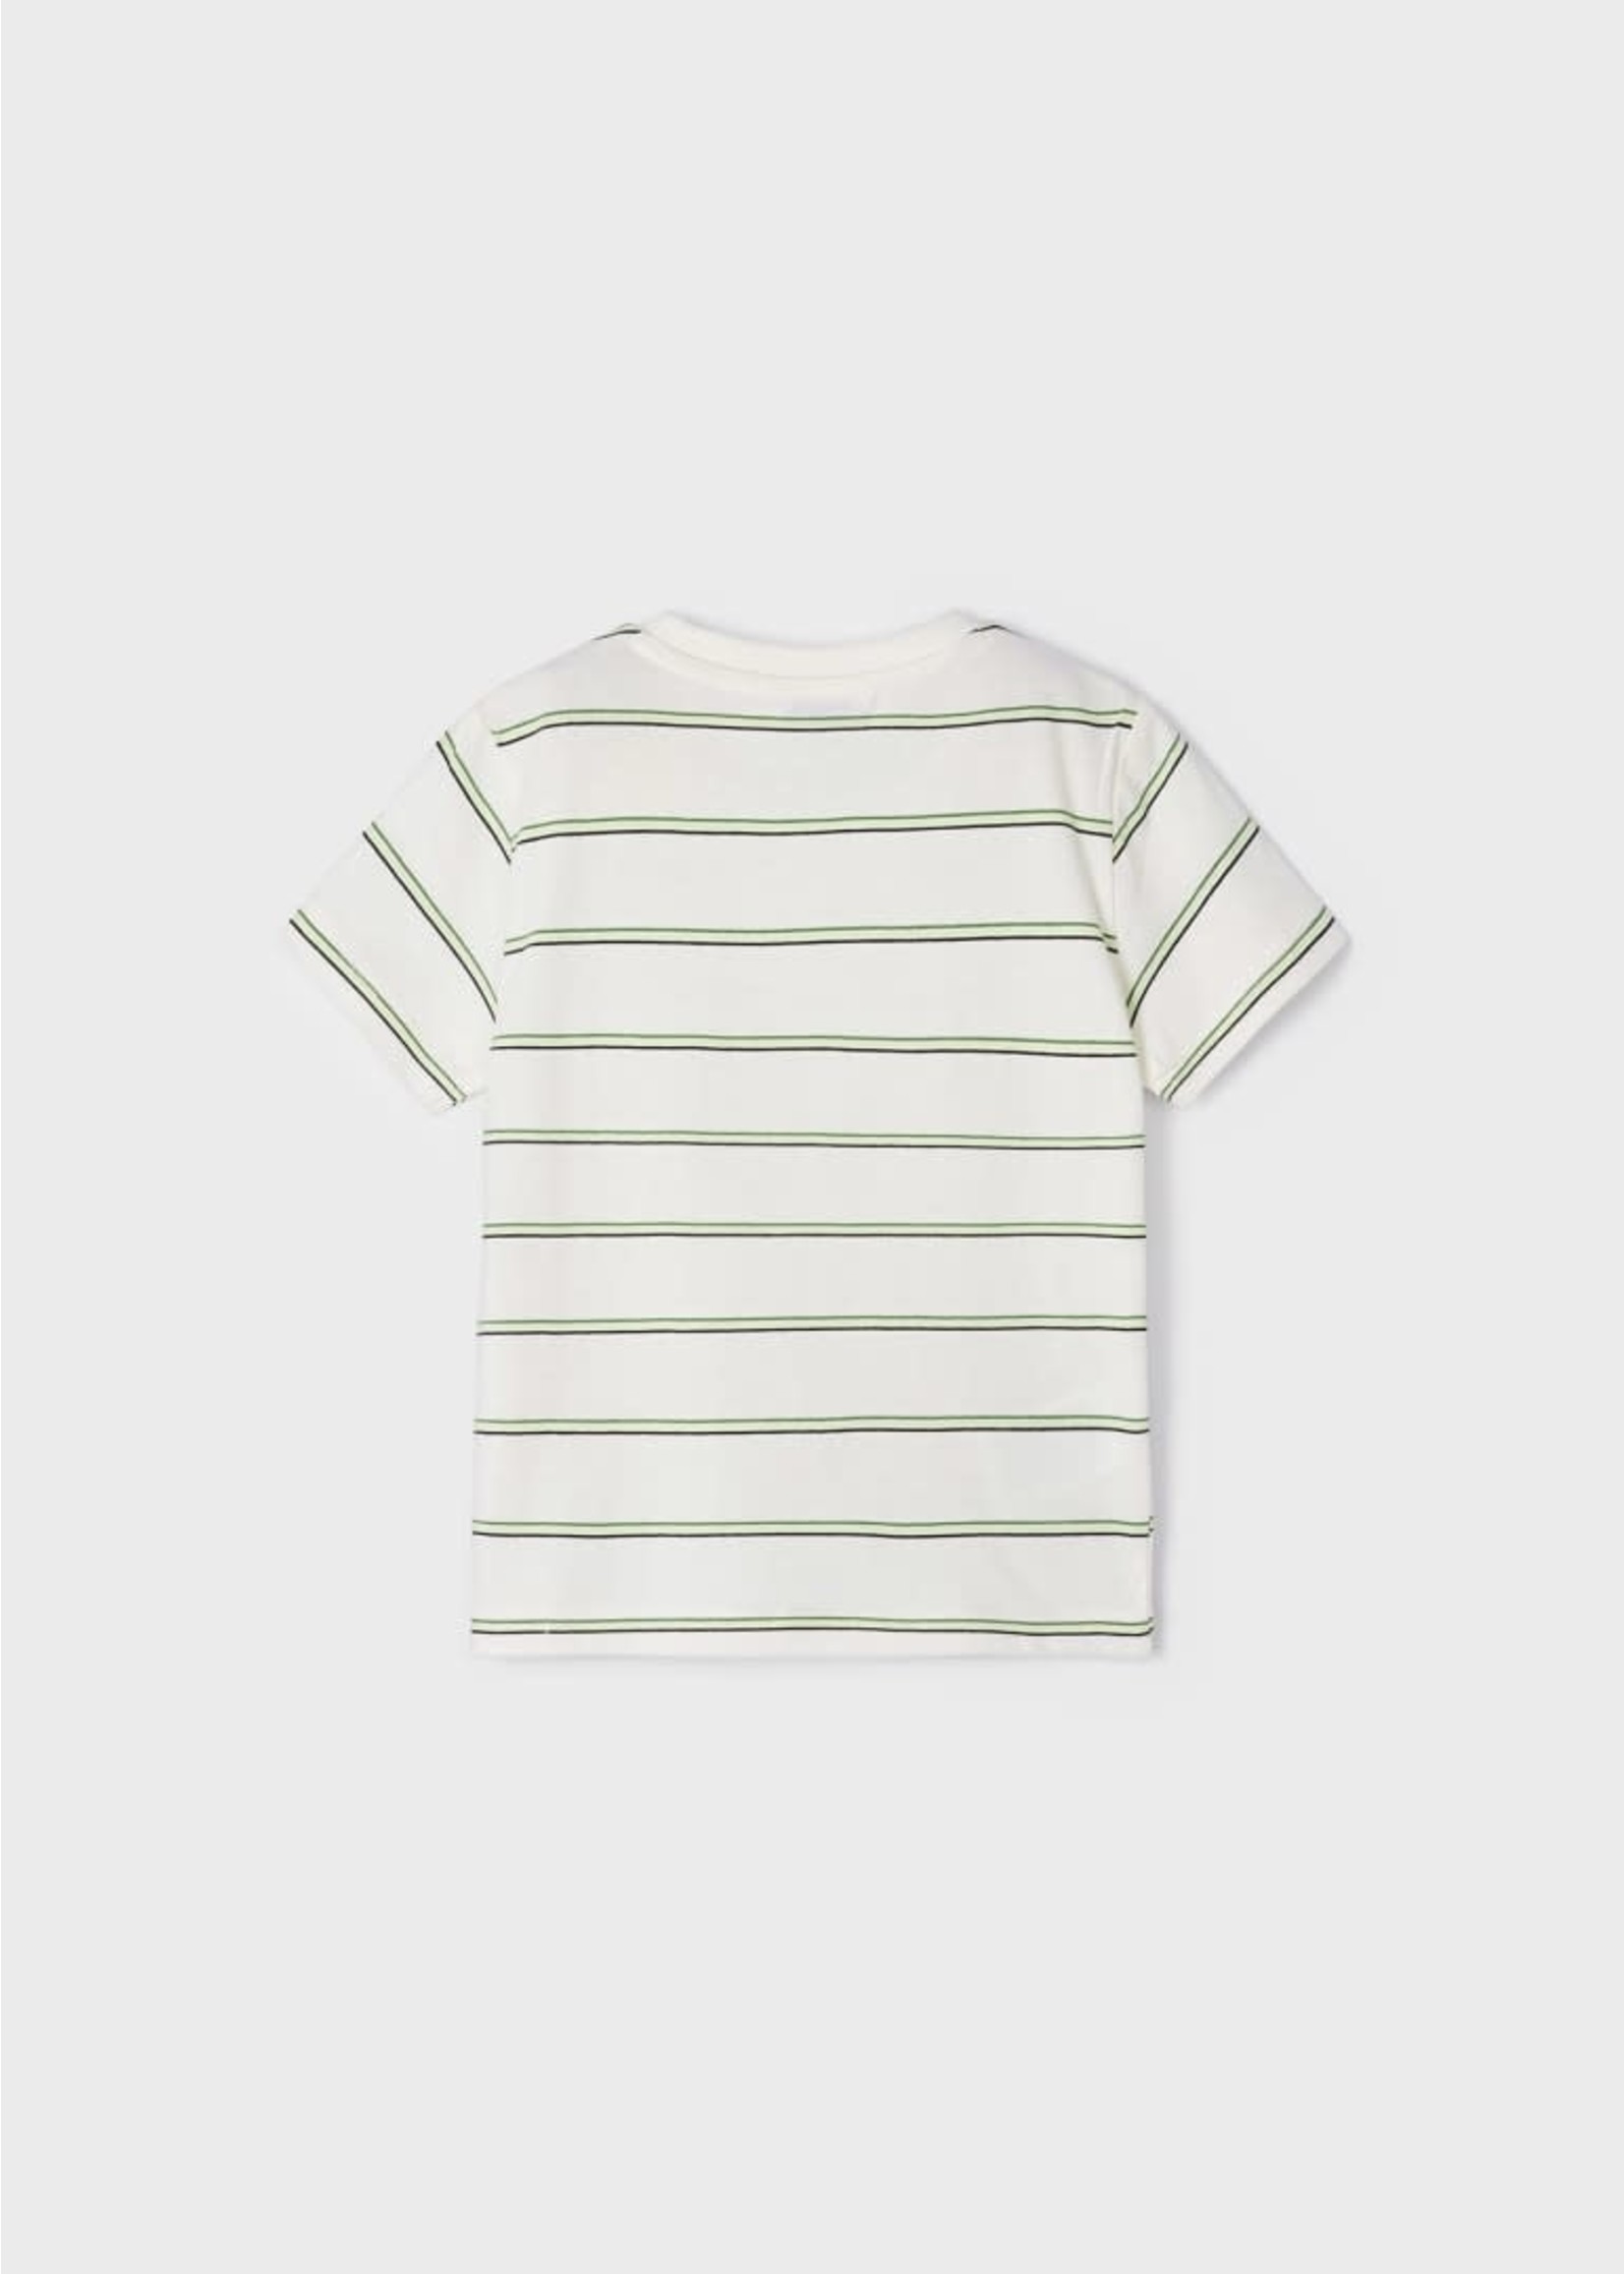 Mayoral Mayoral-S/s striped t-shirt